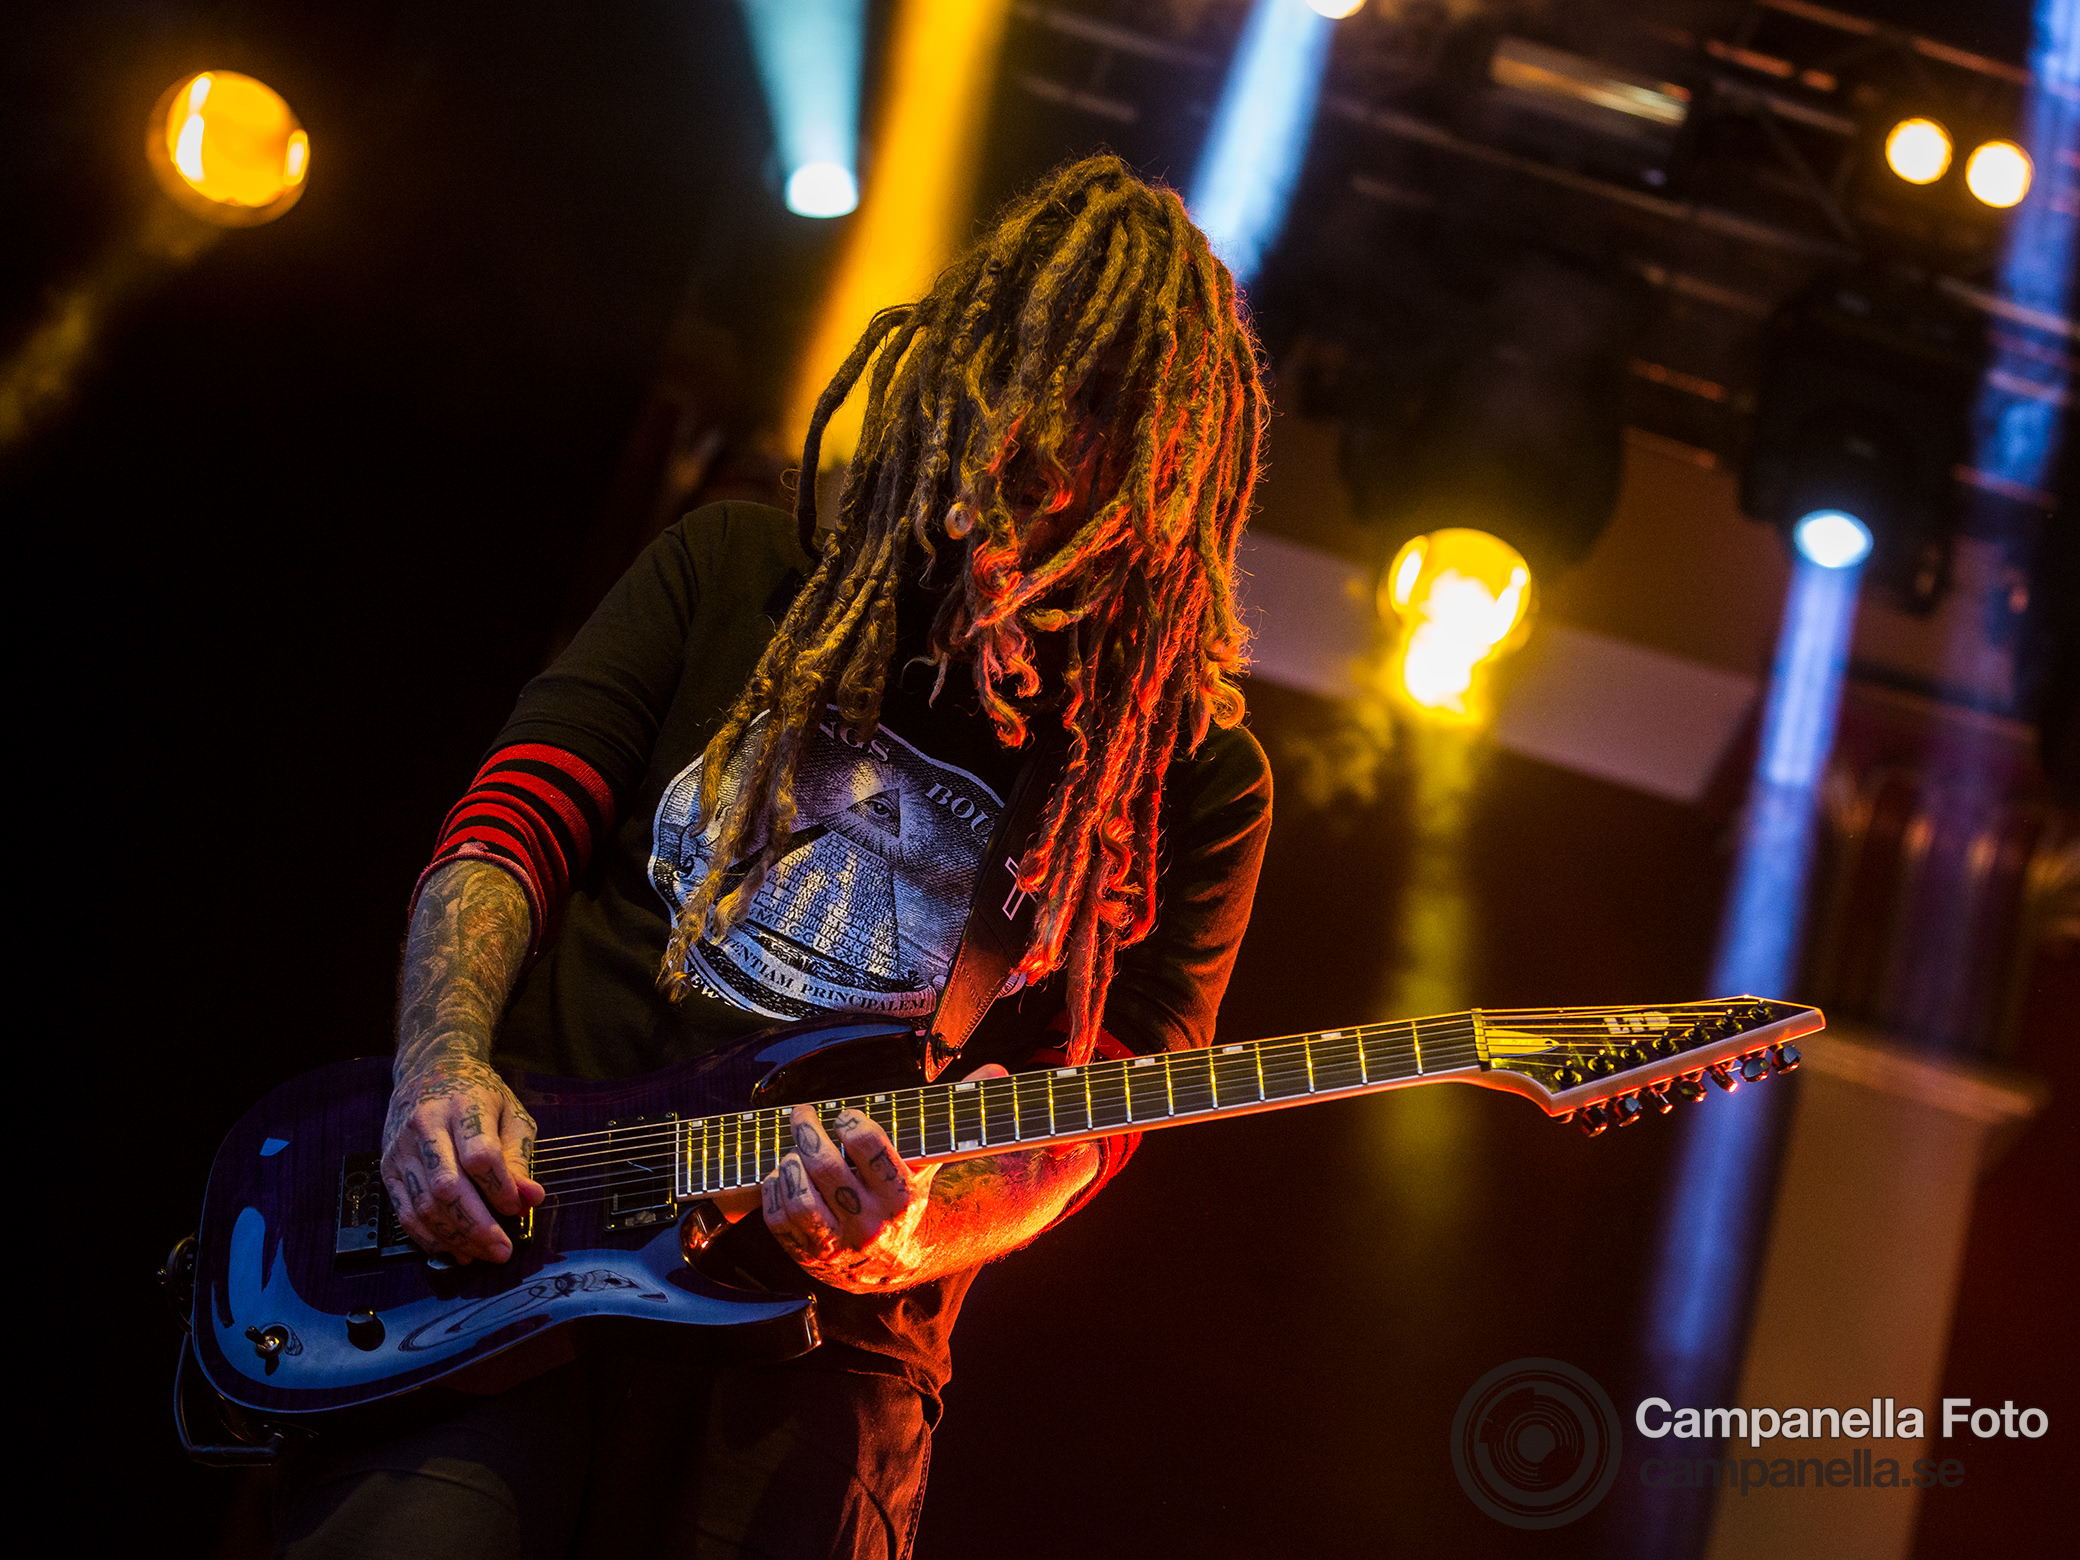 Korn performs in Stockholm - Michael Campanella Photography